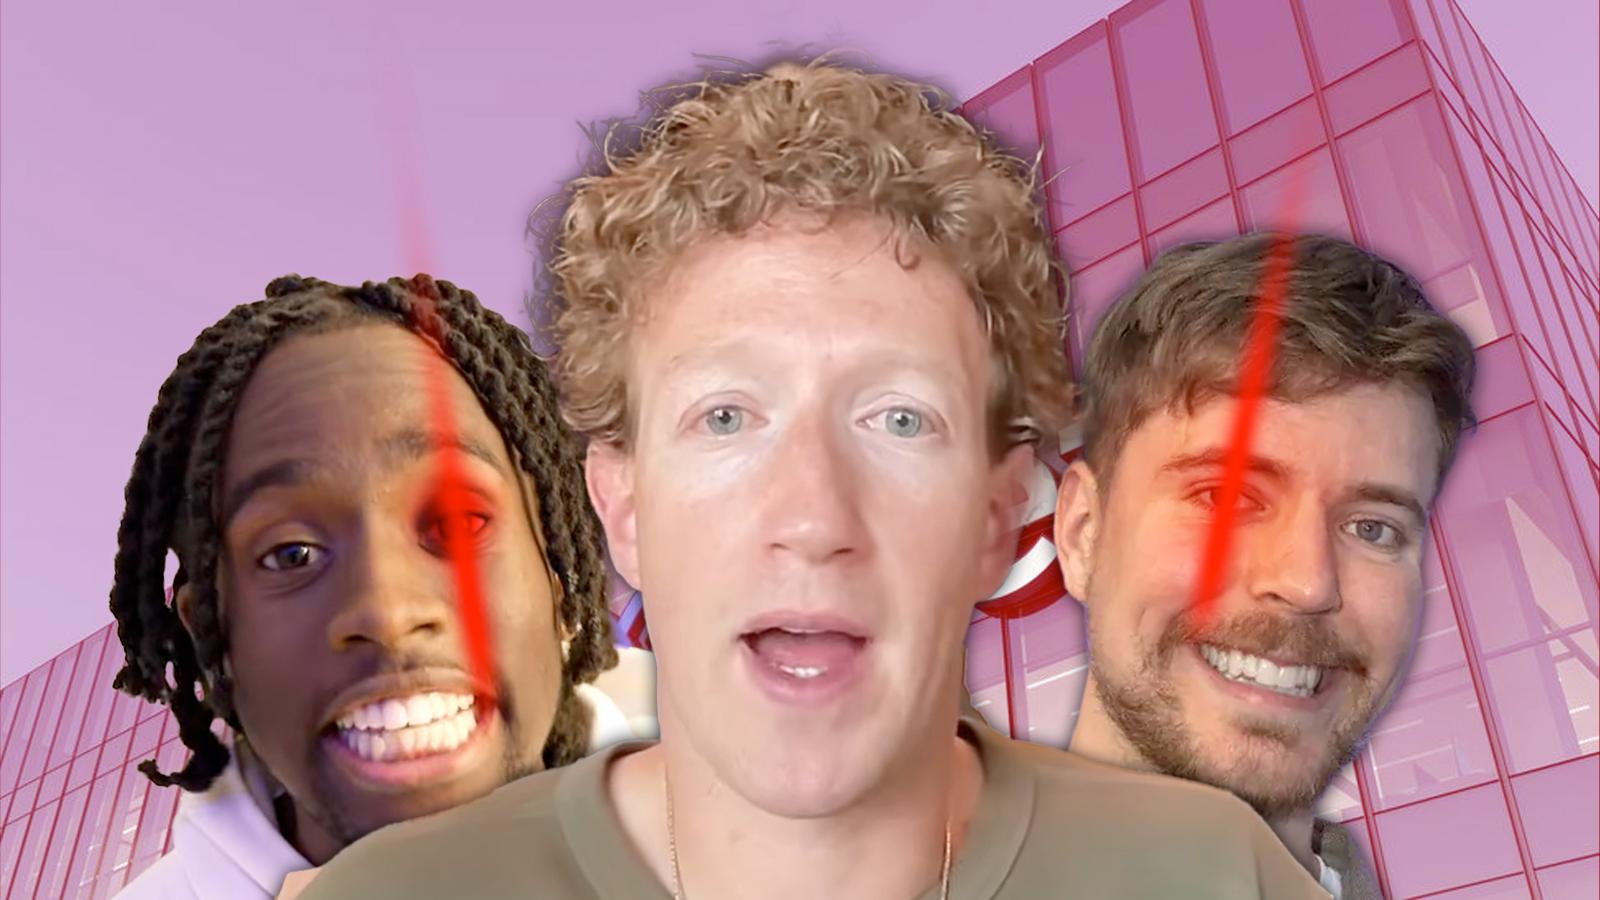 zuckerberg with mr beast and kai cenat with red lights over their eyes to indicate robots